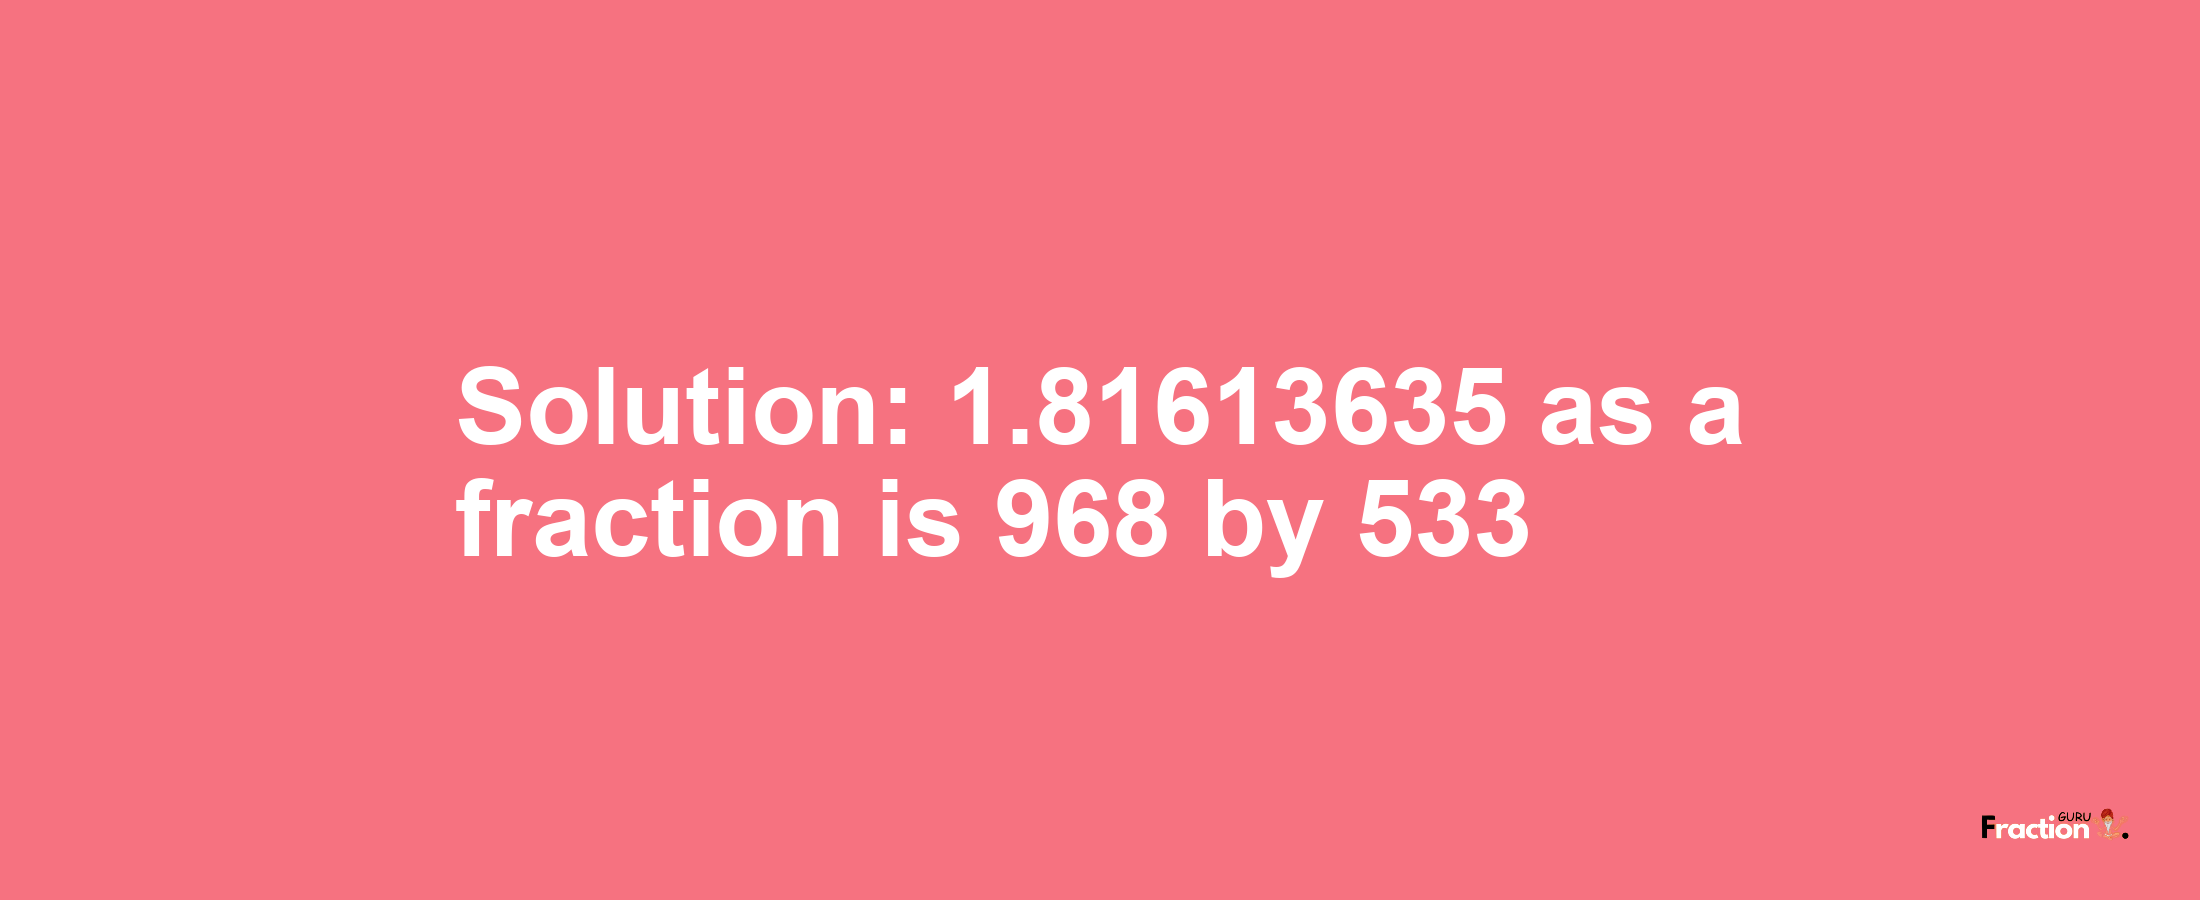 Solution:1.81613635 as a fraction is 968/533